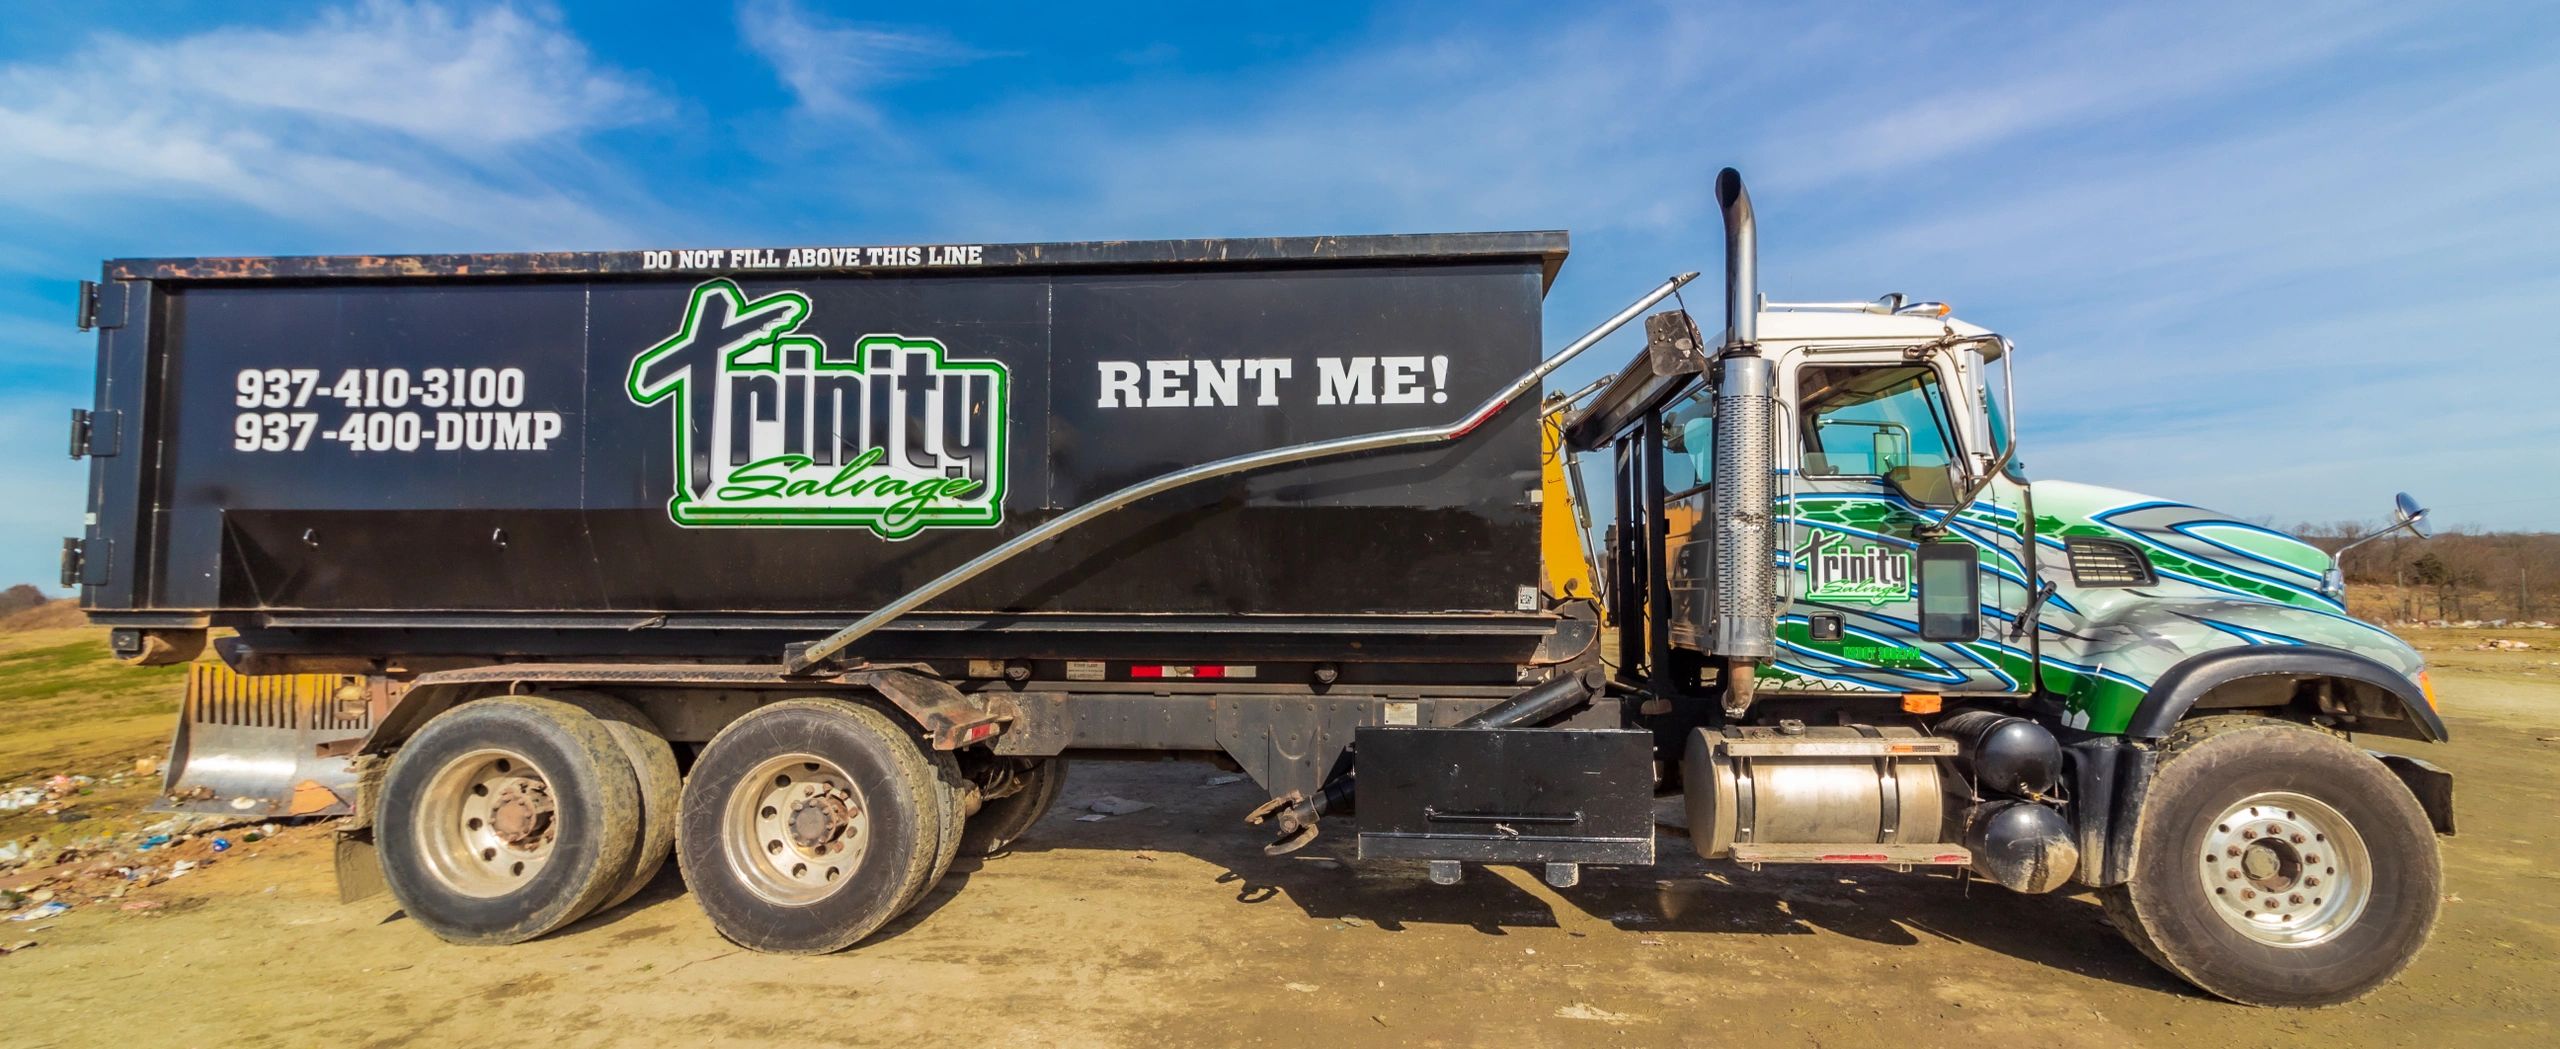 Trinity Salvage roll off dumpster hauling truck